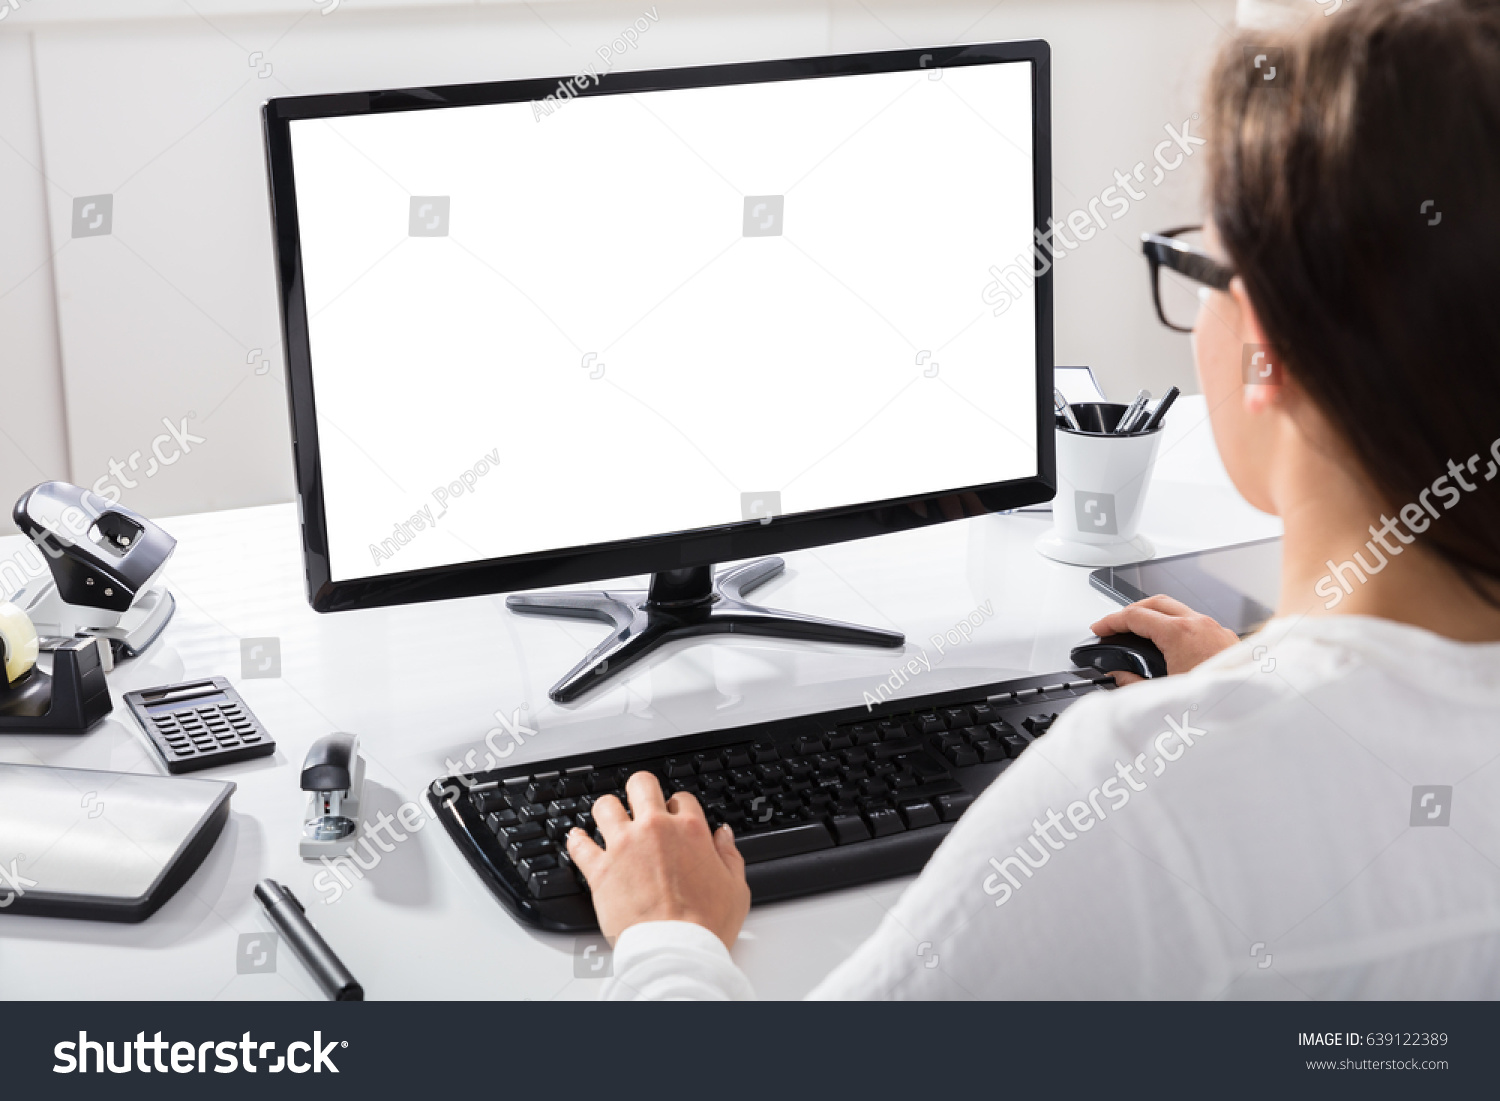 Close-up Of A Businesswoman Using Computer With Blank Screen At Workplace #639122389